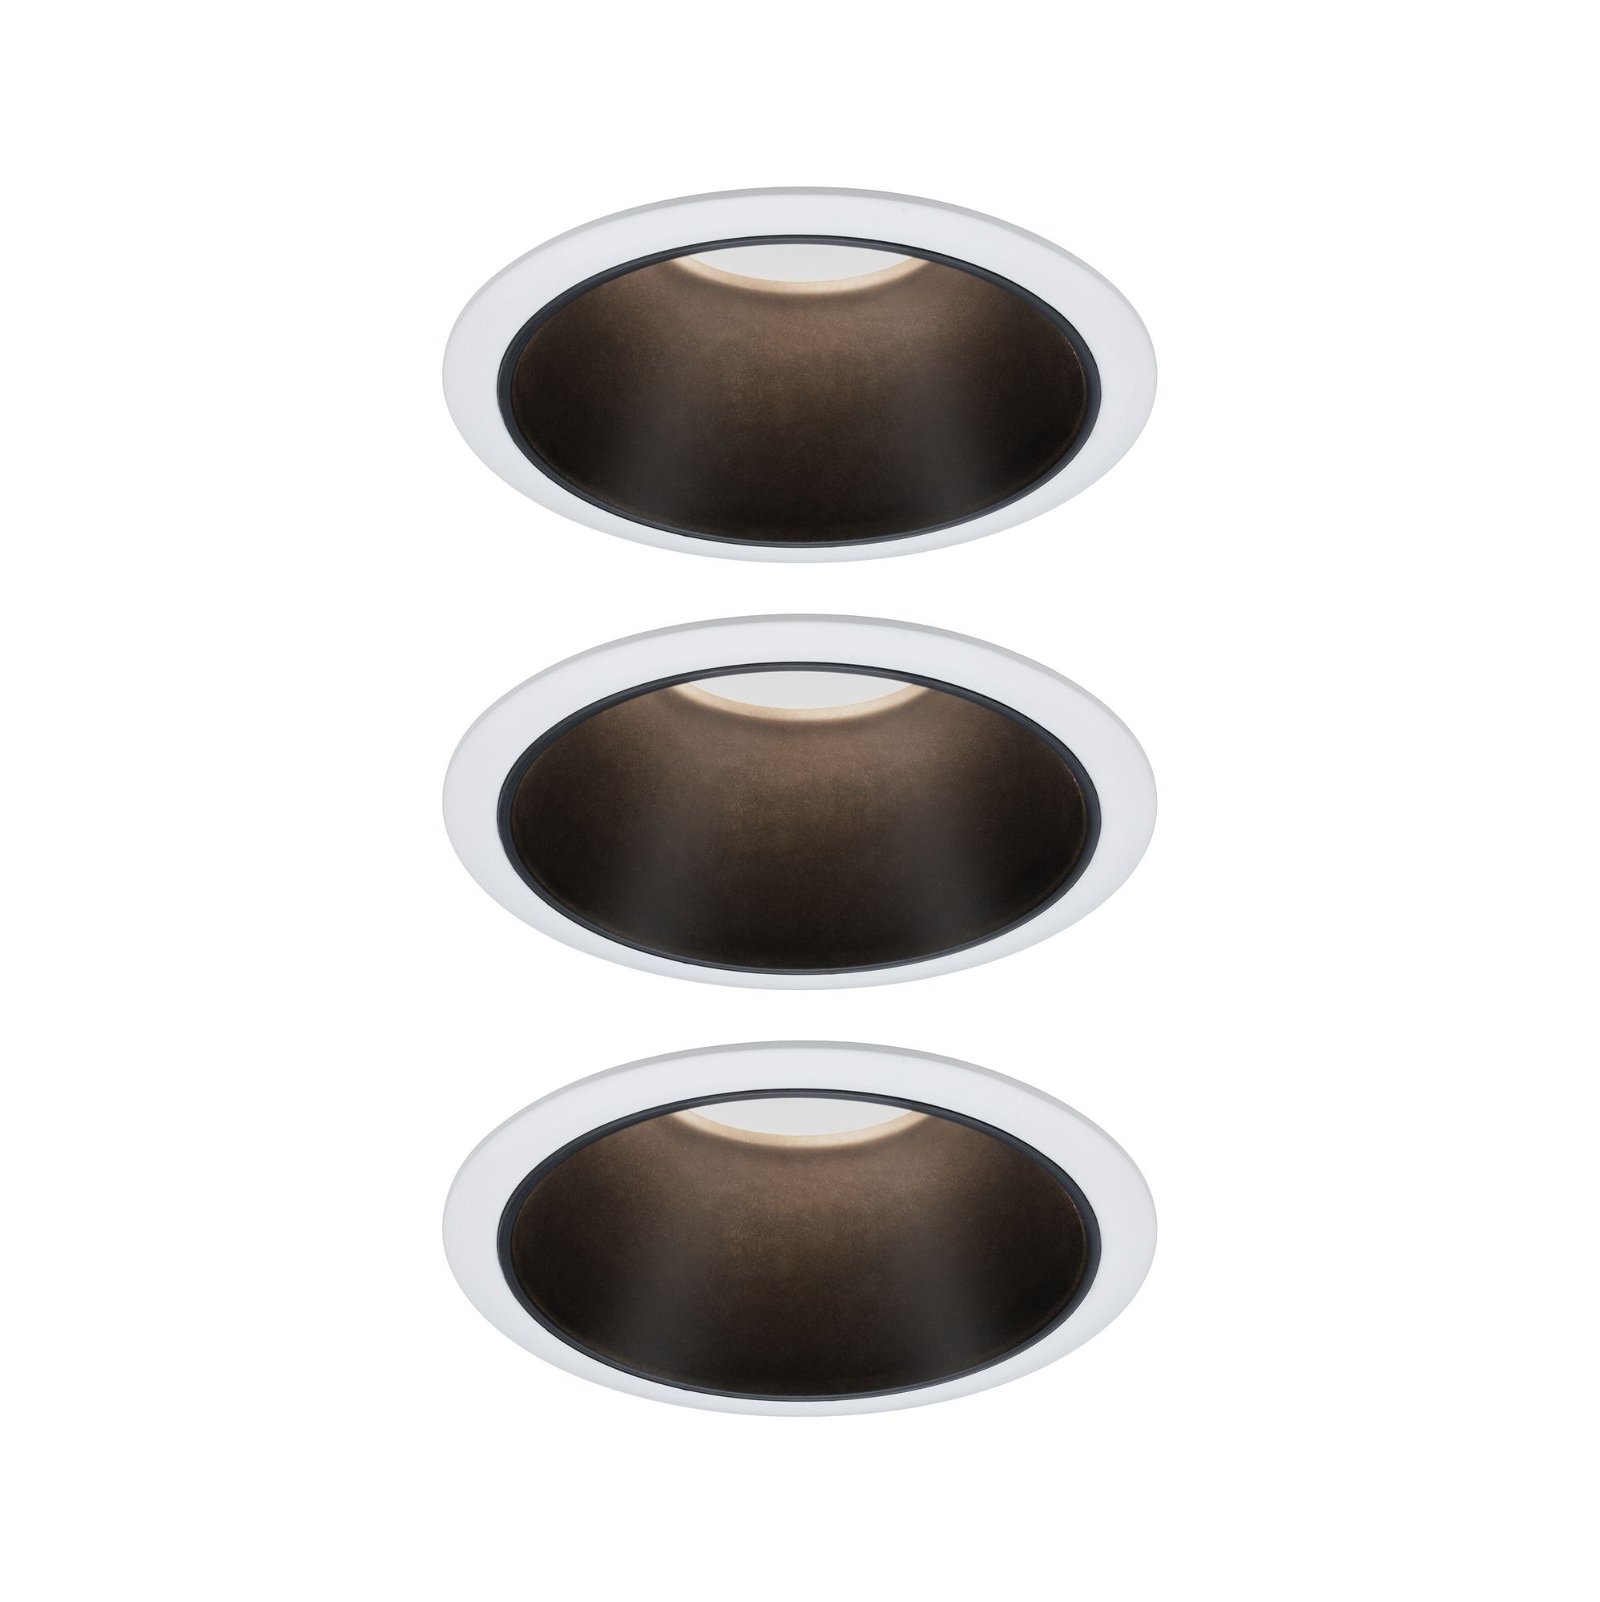 LED Recessed luminaire 3-Step-Dim Cole Coin Basic Set IP44 round 88mm Coin 3x6W 3x470lm 230V dimmable 2700K White/Black matt